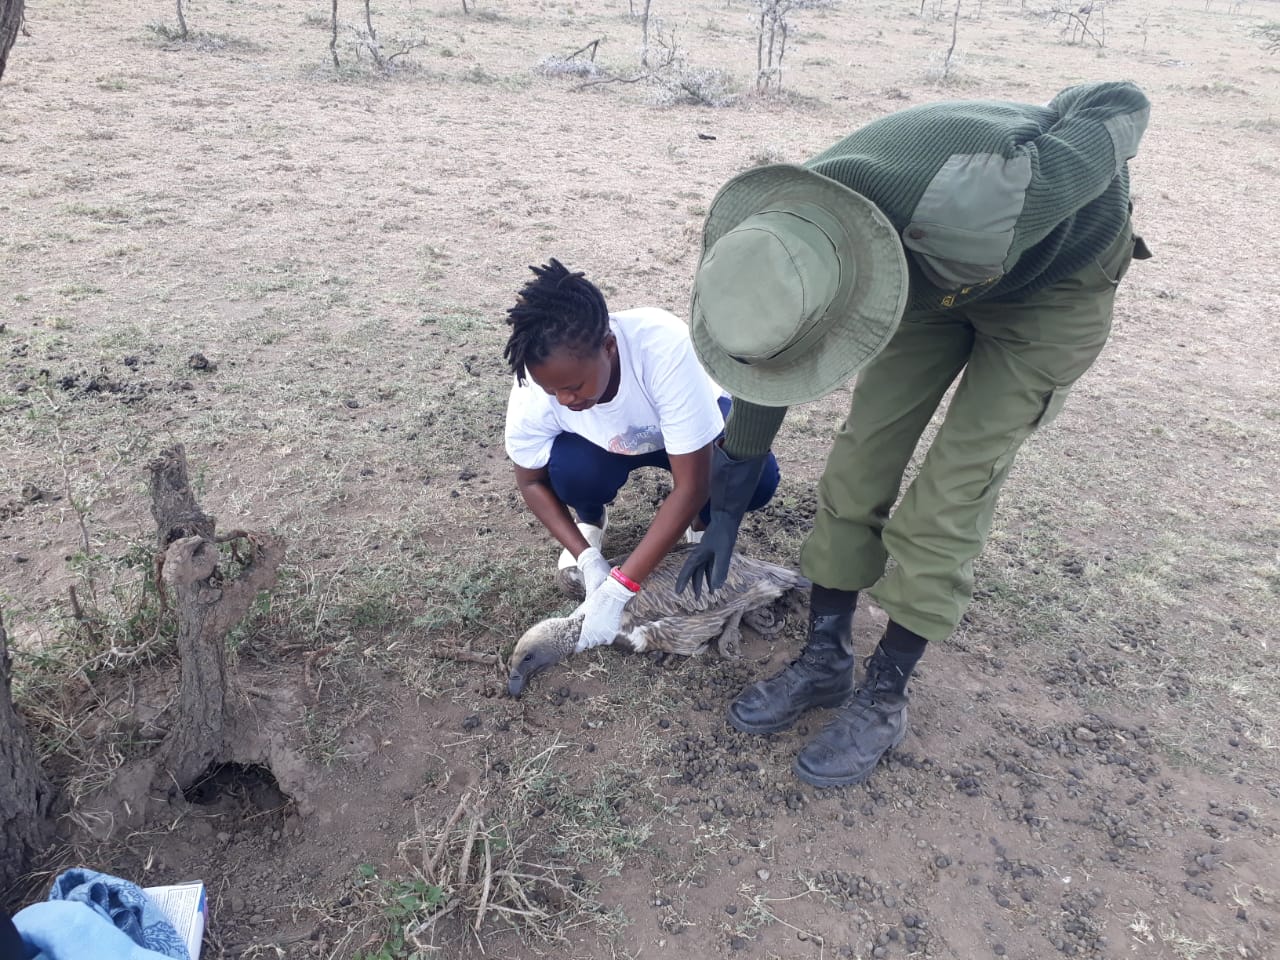 Valerie Nasoita and a ranger work to provide care to a sick vulture